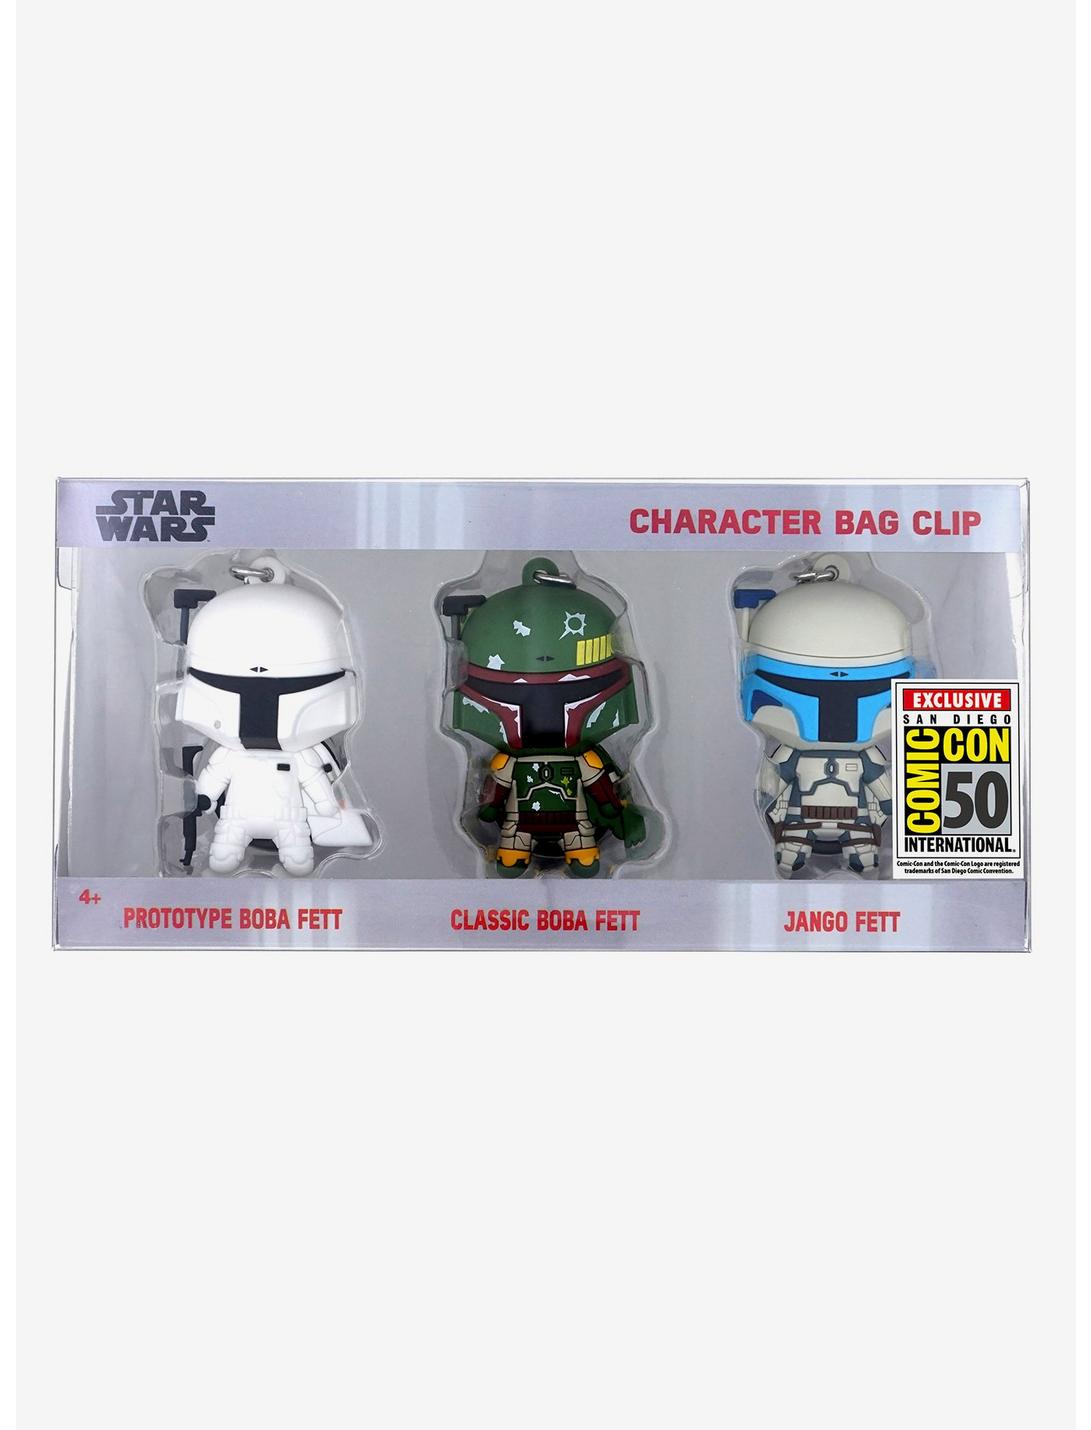 Star Wars Bounty Hunter Figural Key Chain Set 2019 Summer Convention Exclusive, , hi-res